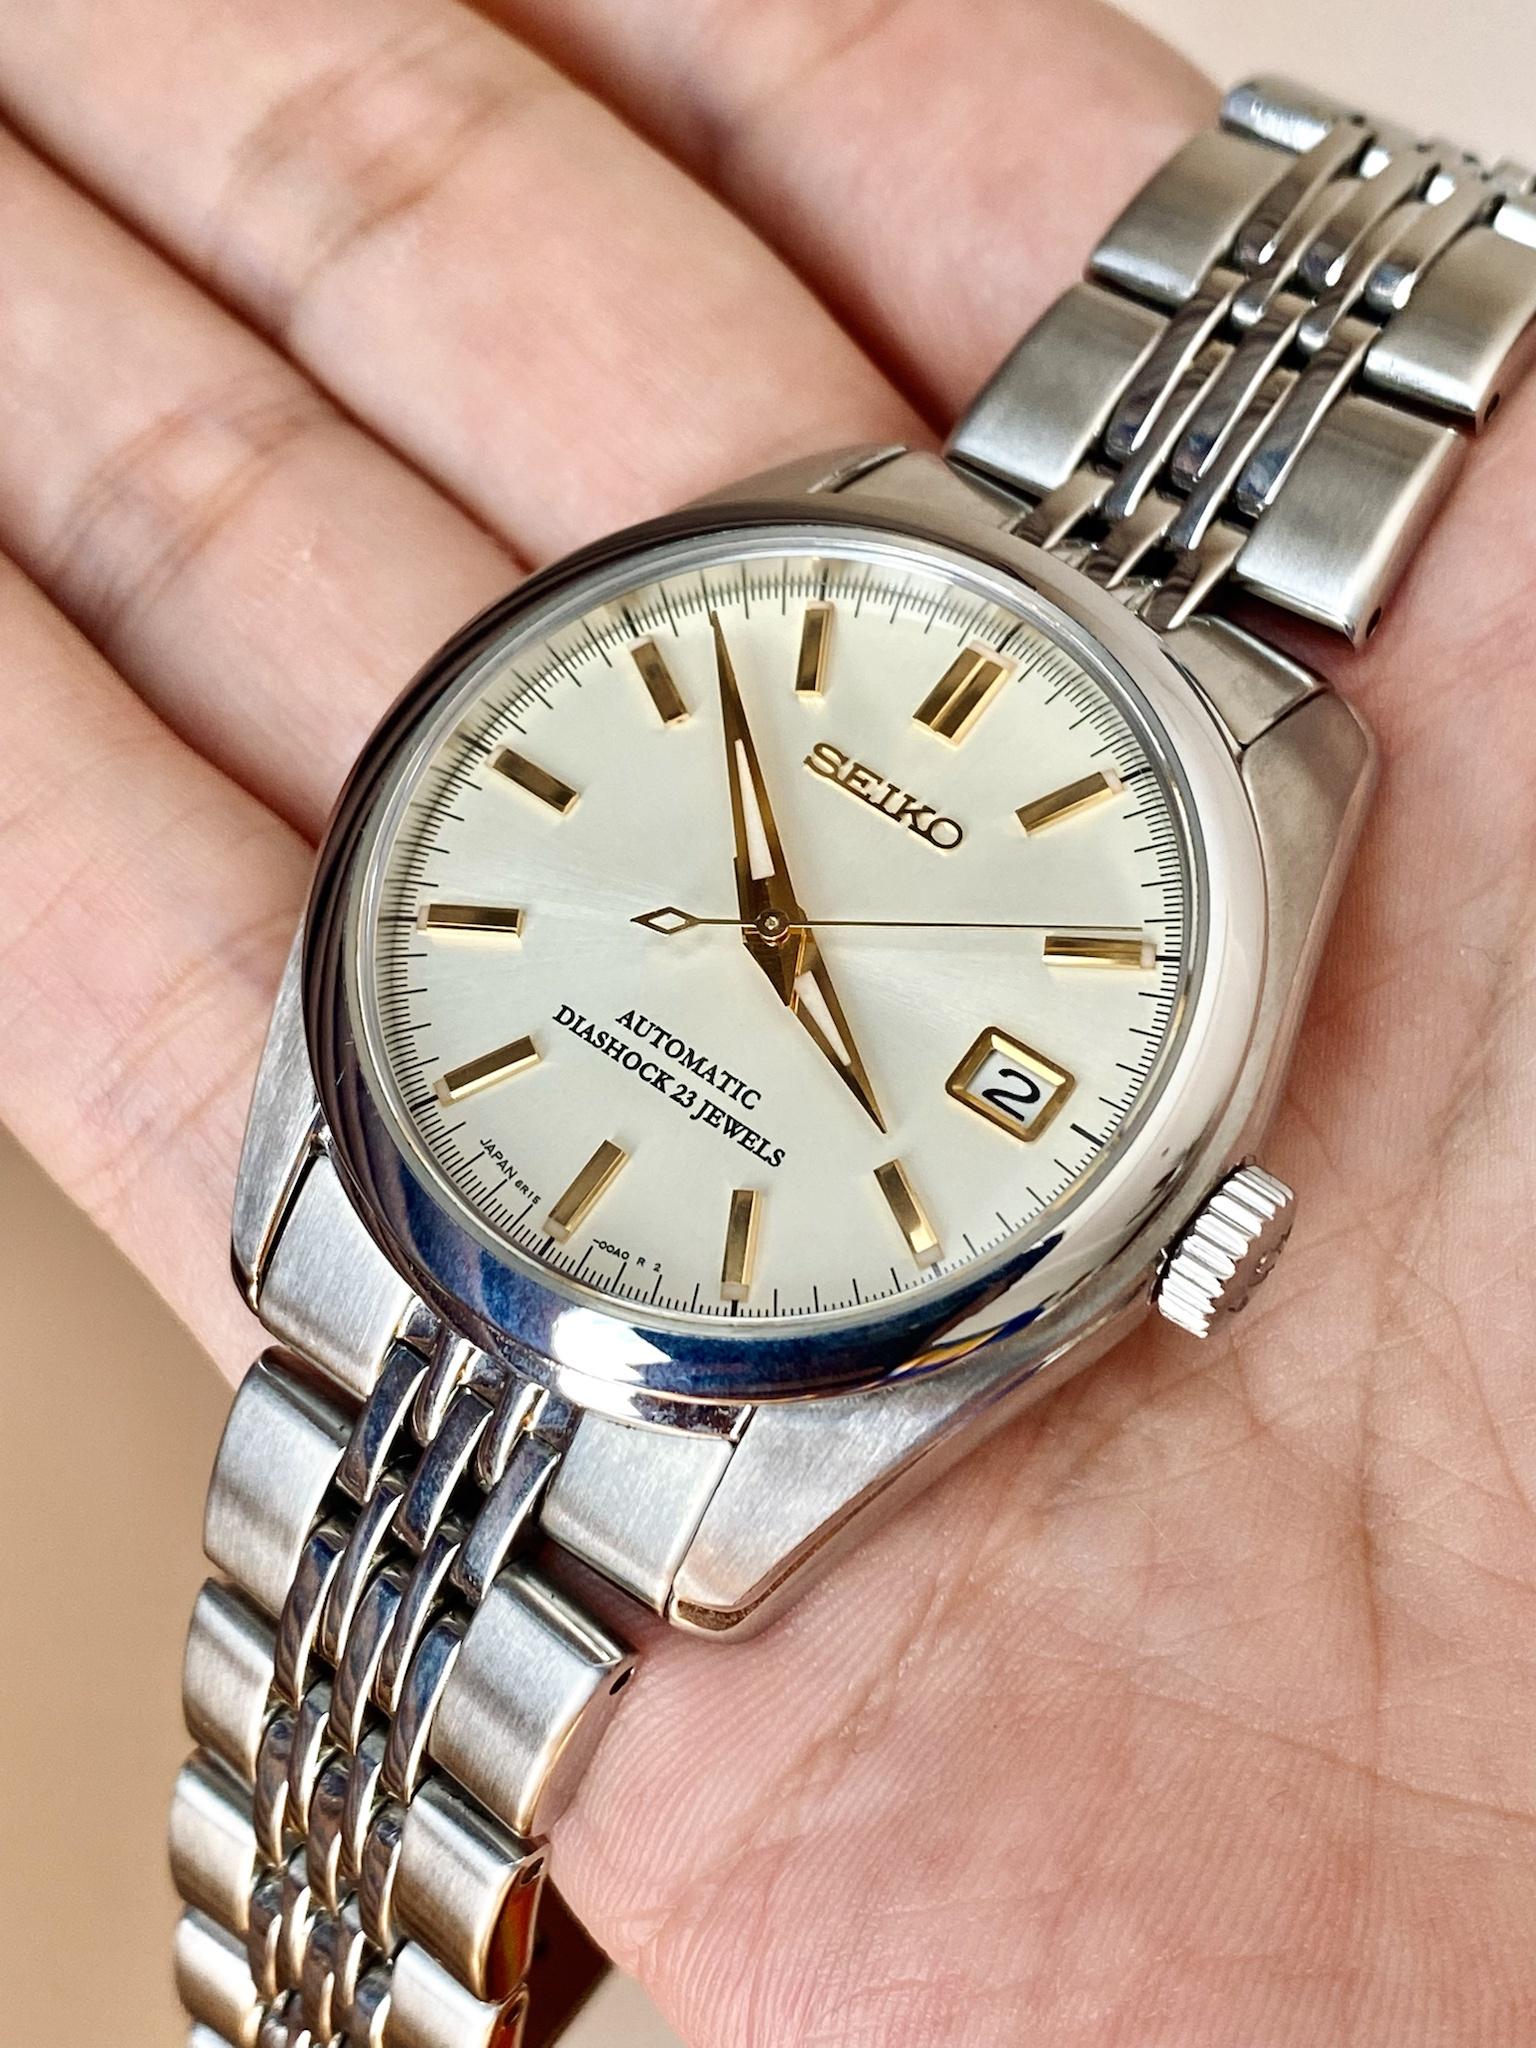 WTS] Seiko SCVS001 in great condition - the 2nd watch | WatchCharts